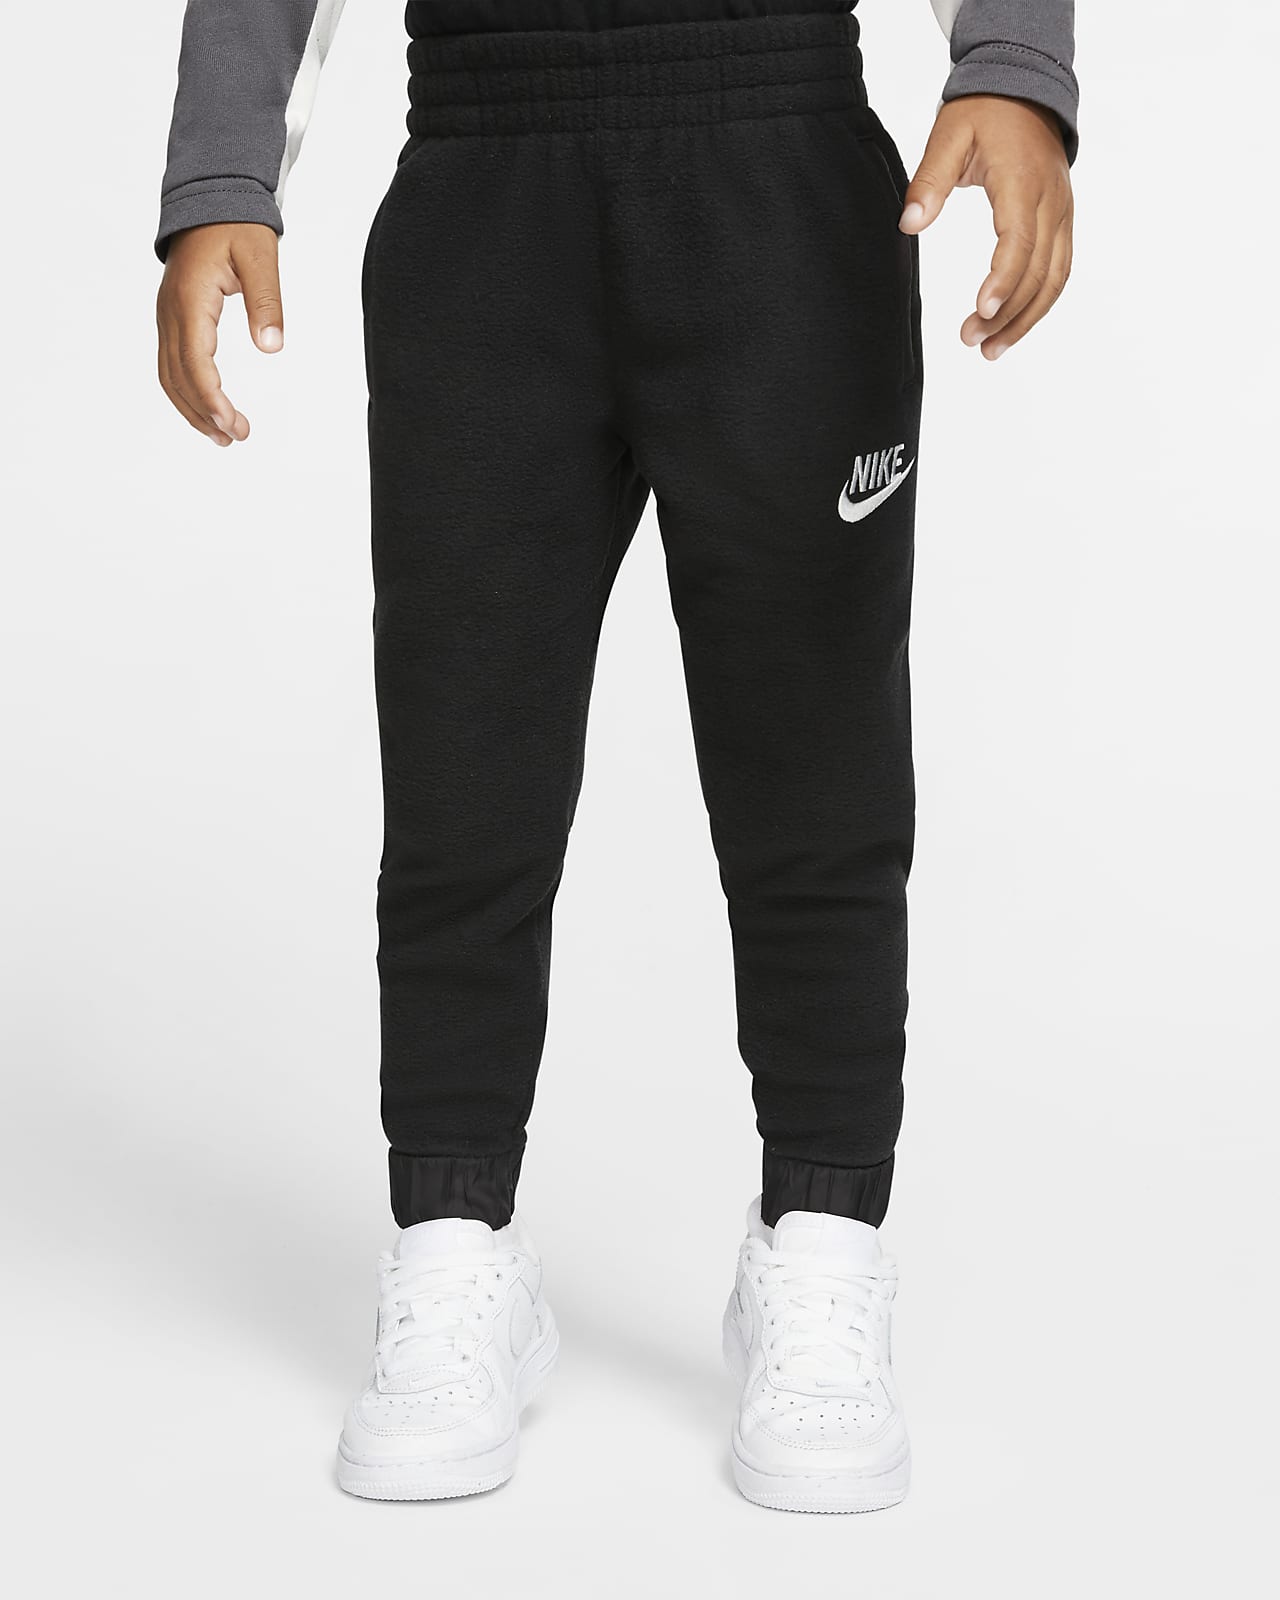 nike joggers for toddlers